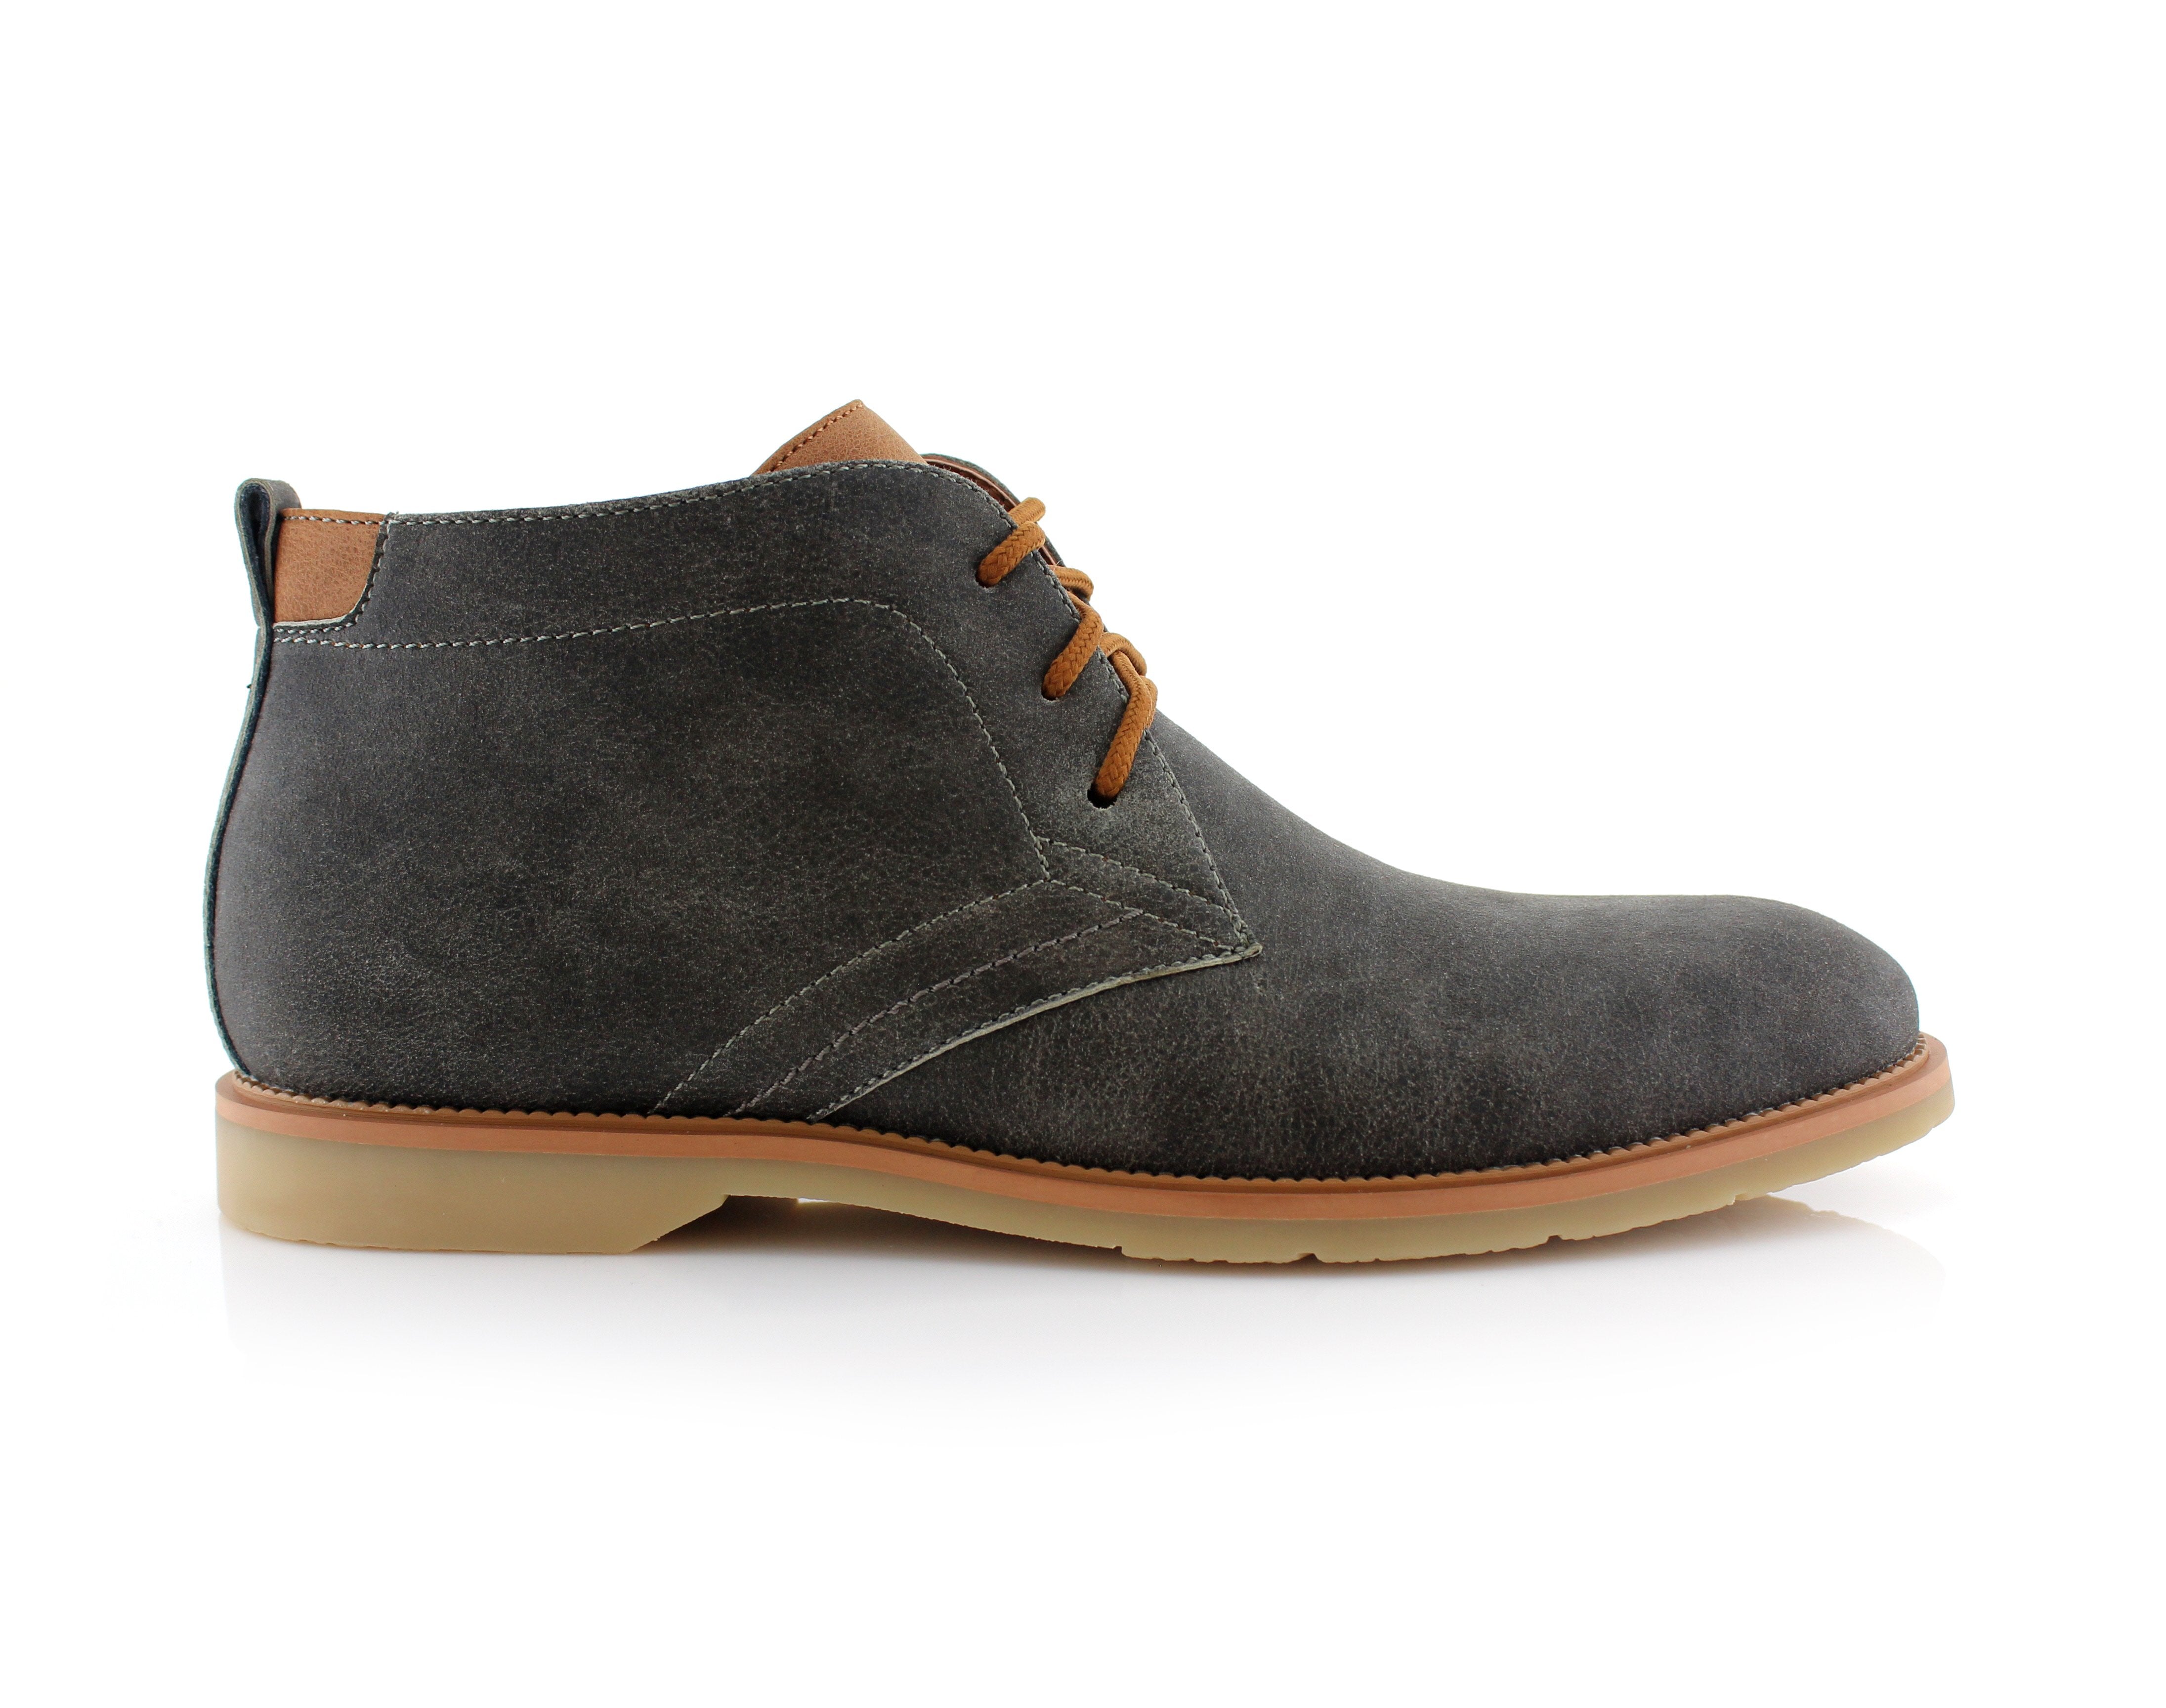 Two-Toned Chukka Boots | Marvin by Ferro Aldo | Conal Footwear | Outer Side Angle View